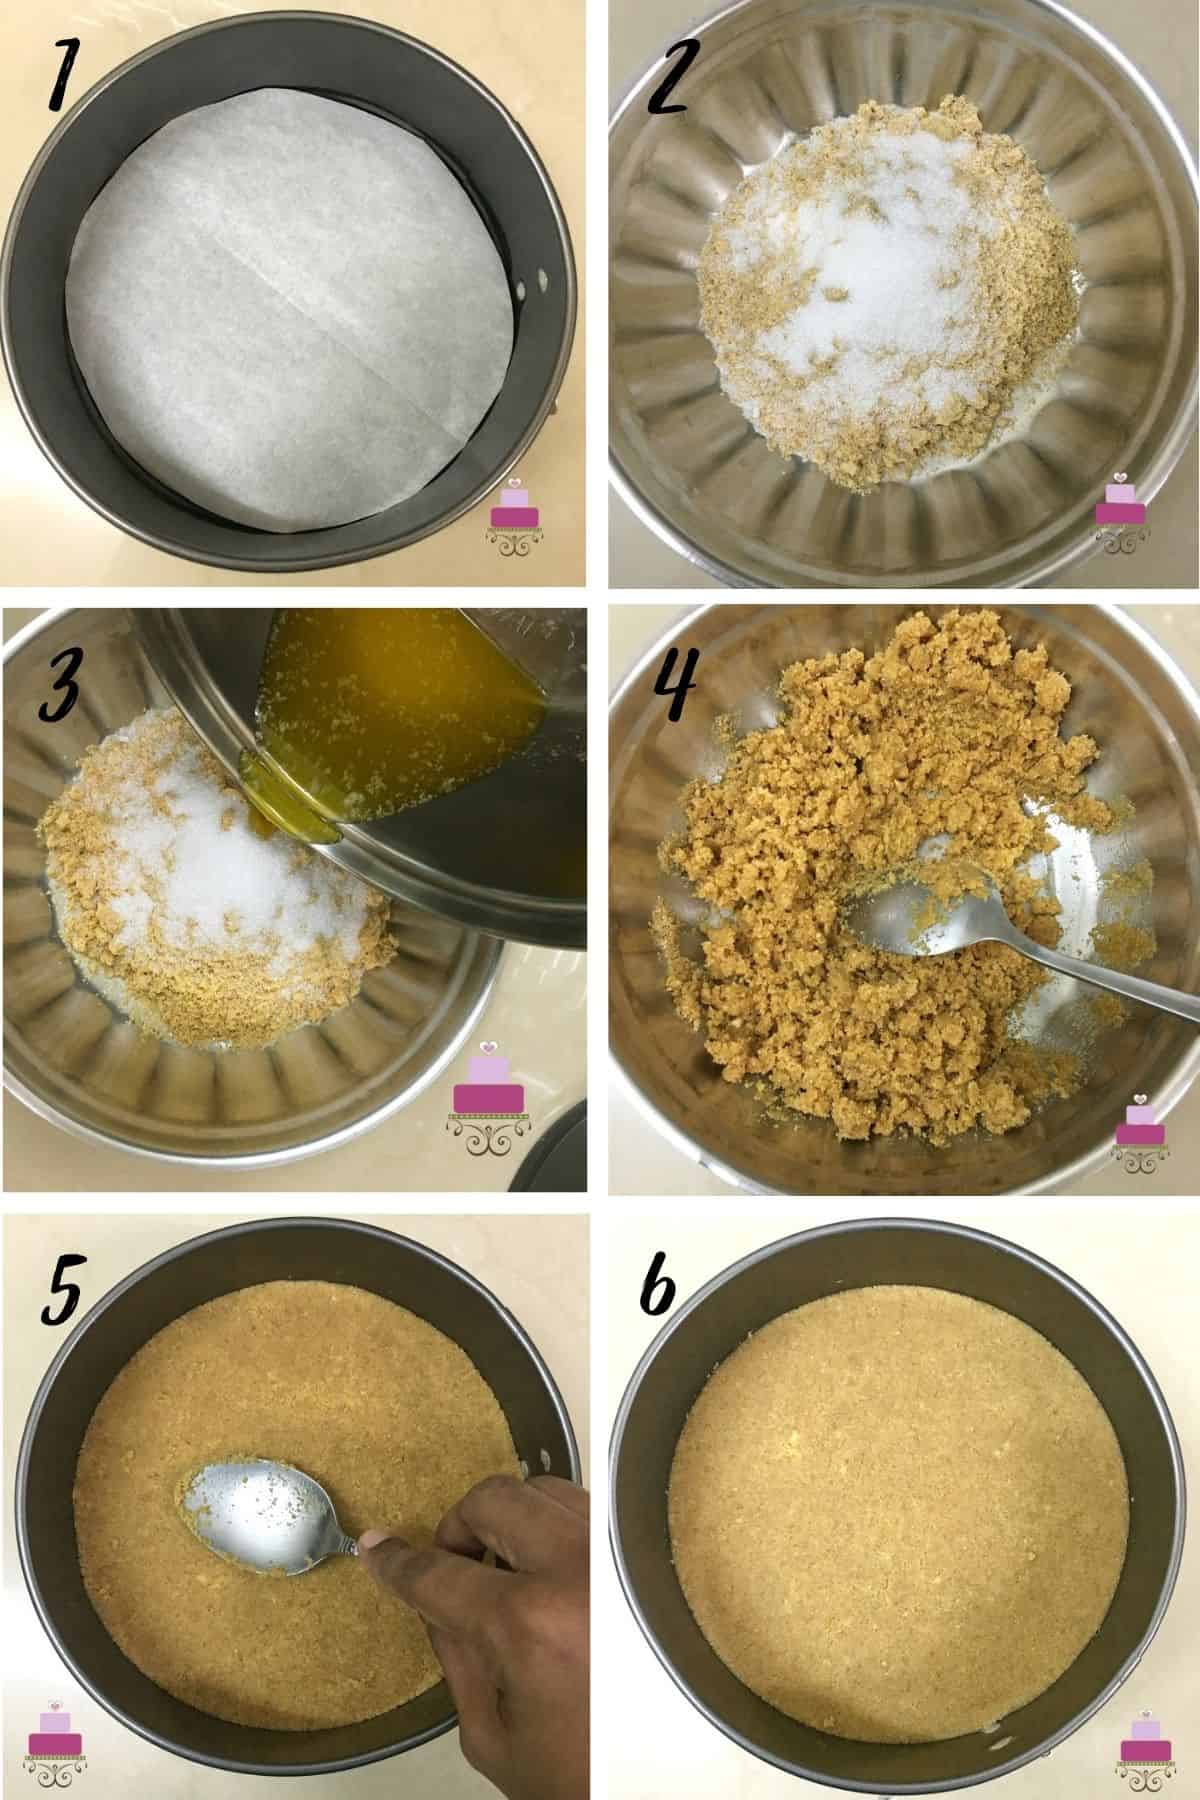 A poster of 6 images showing how to prepare cheesecake crust